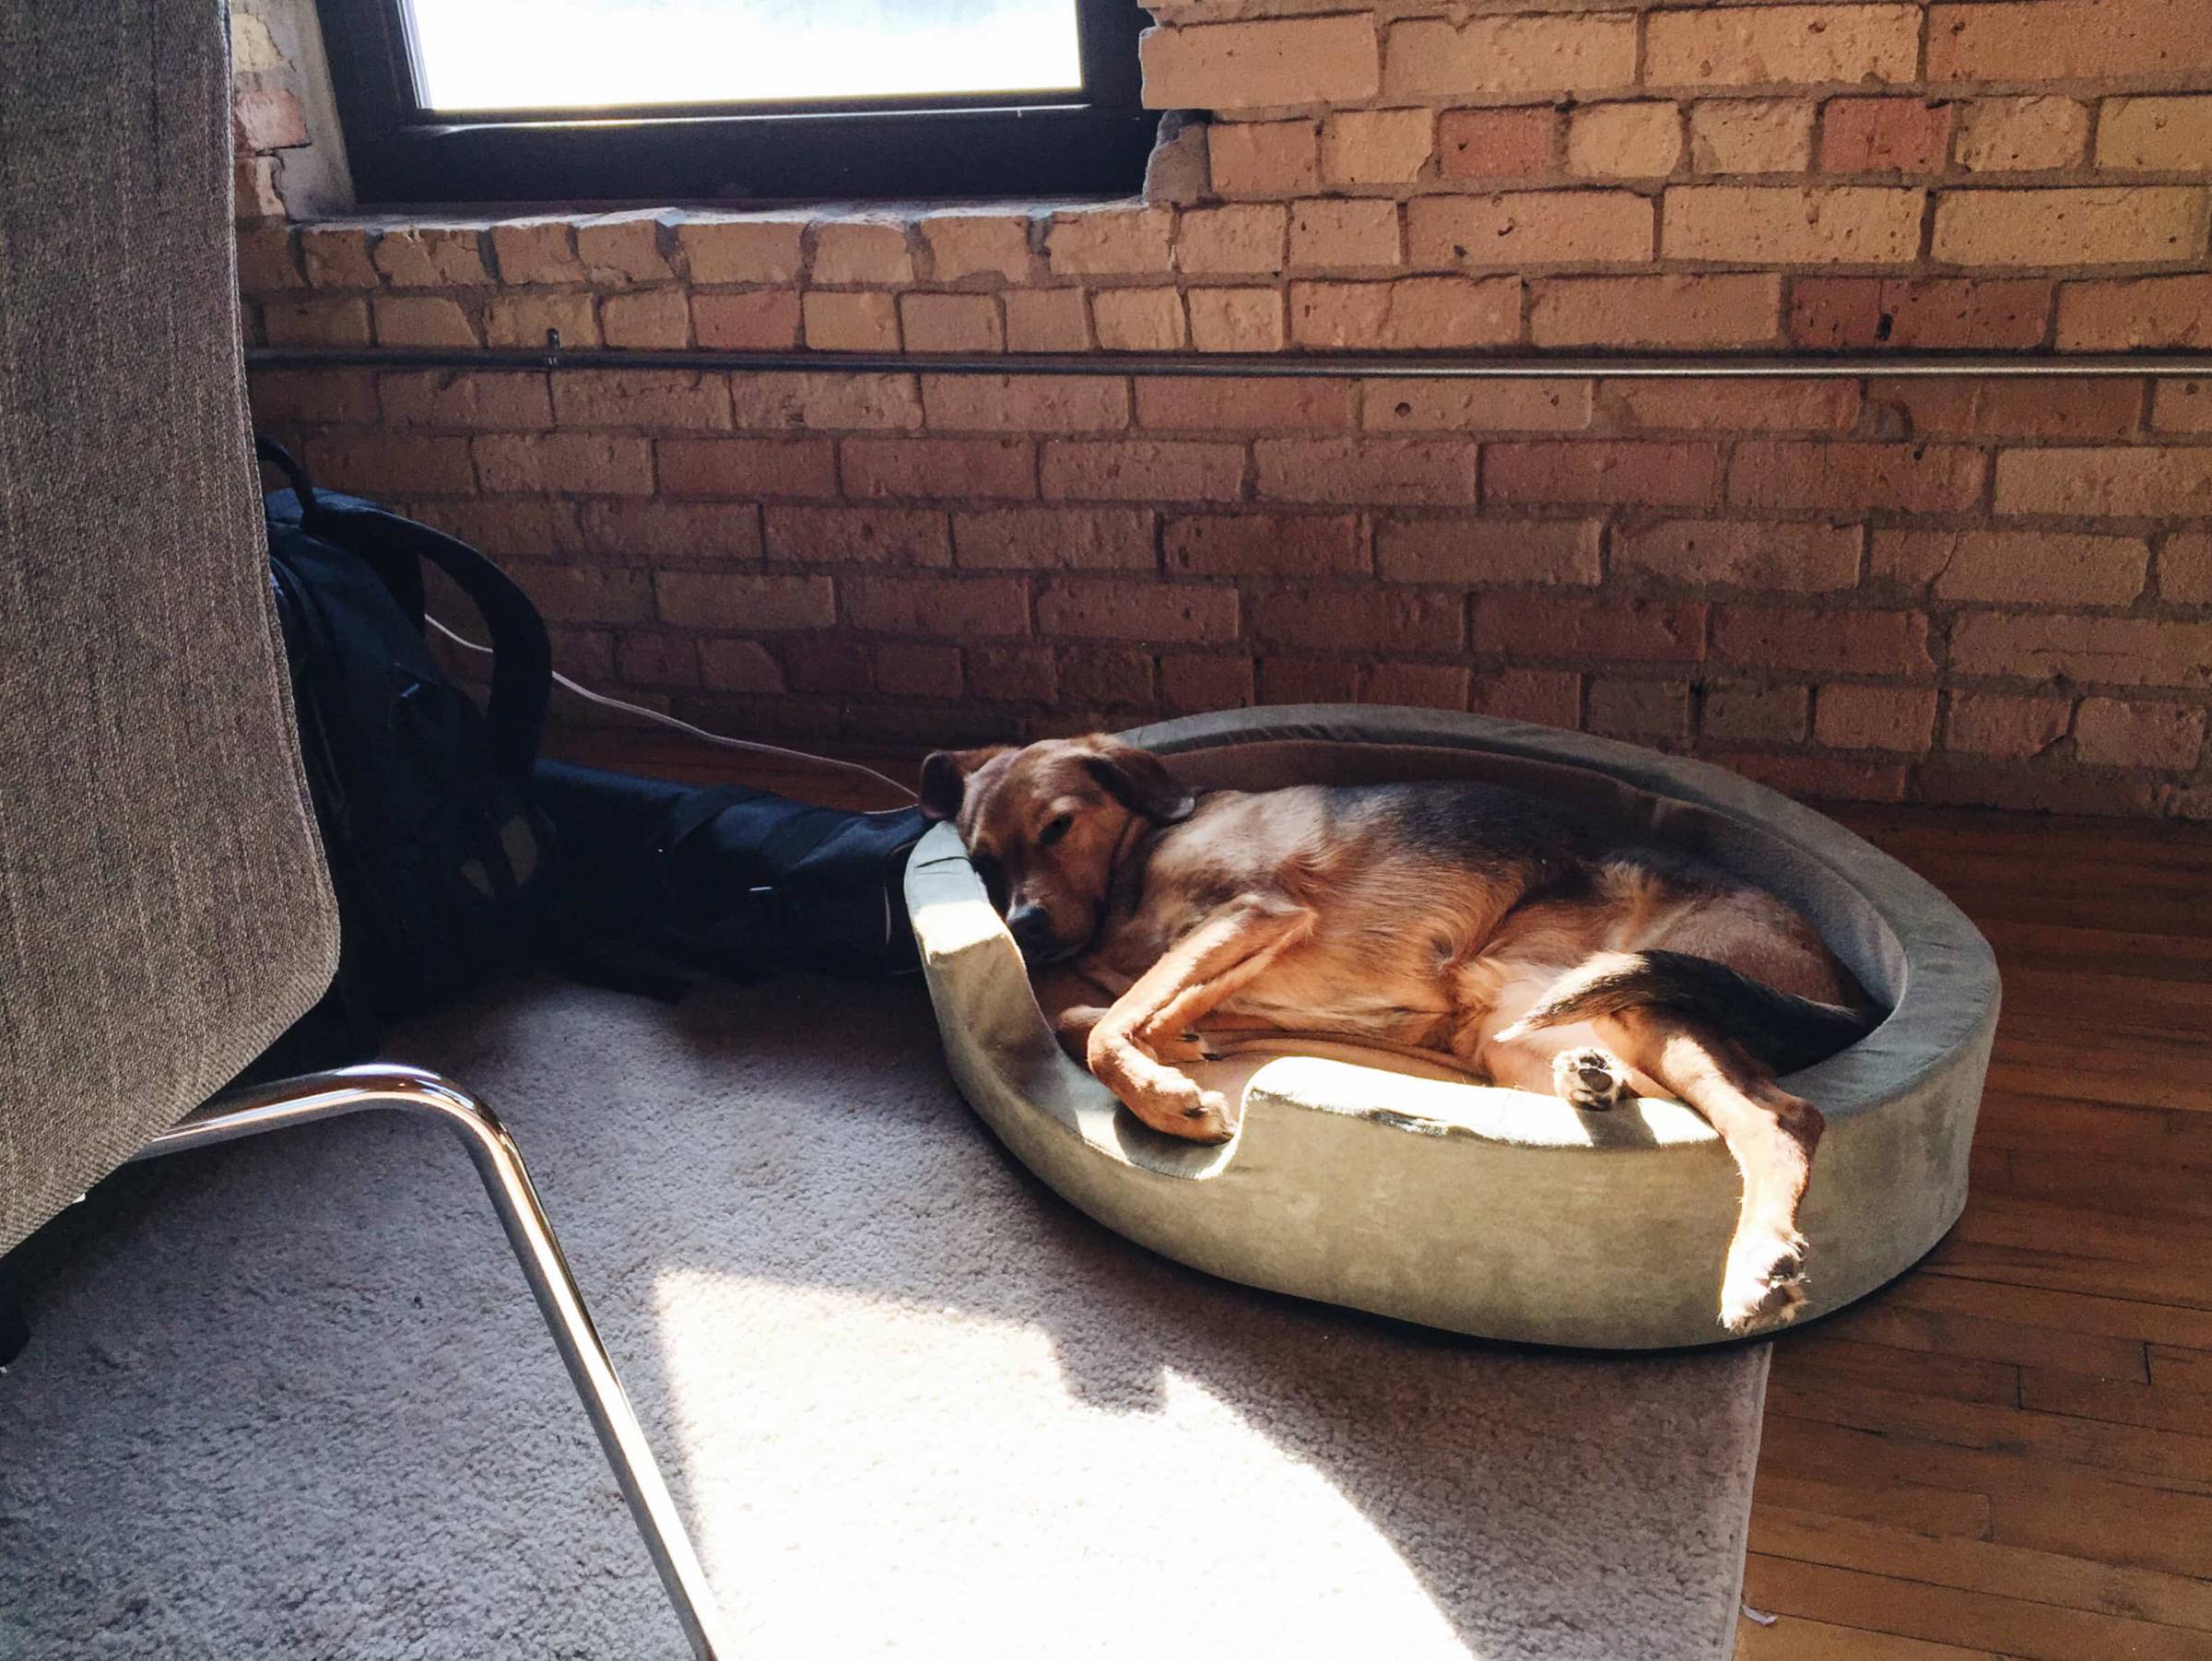 Dog laying in a dog bed.